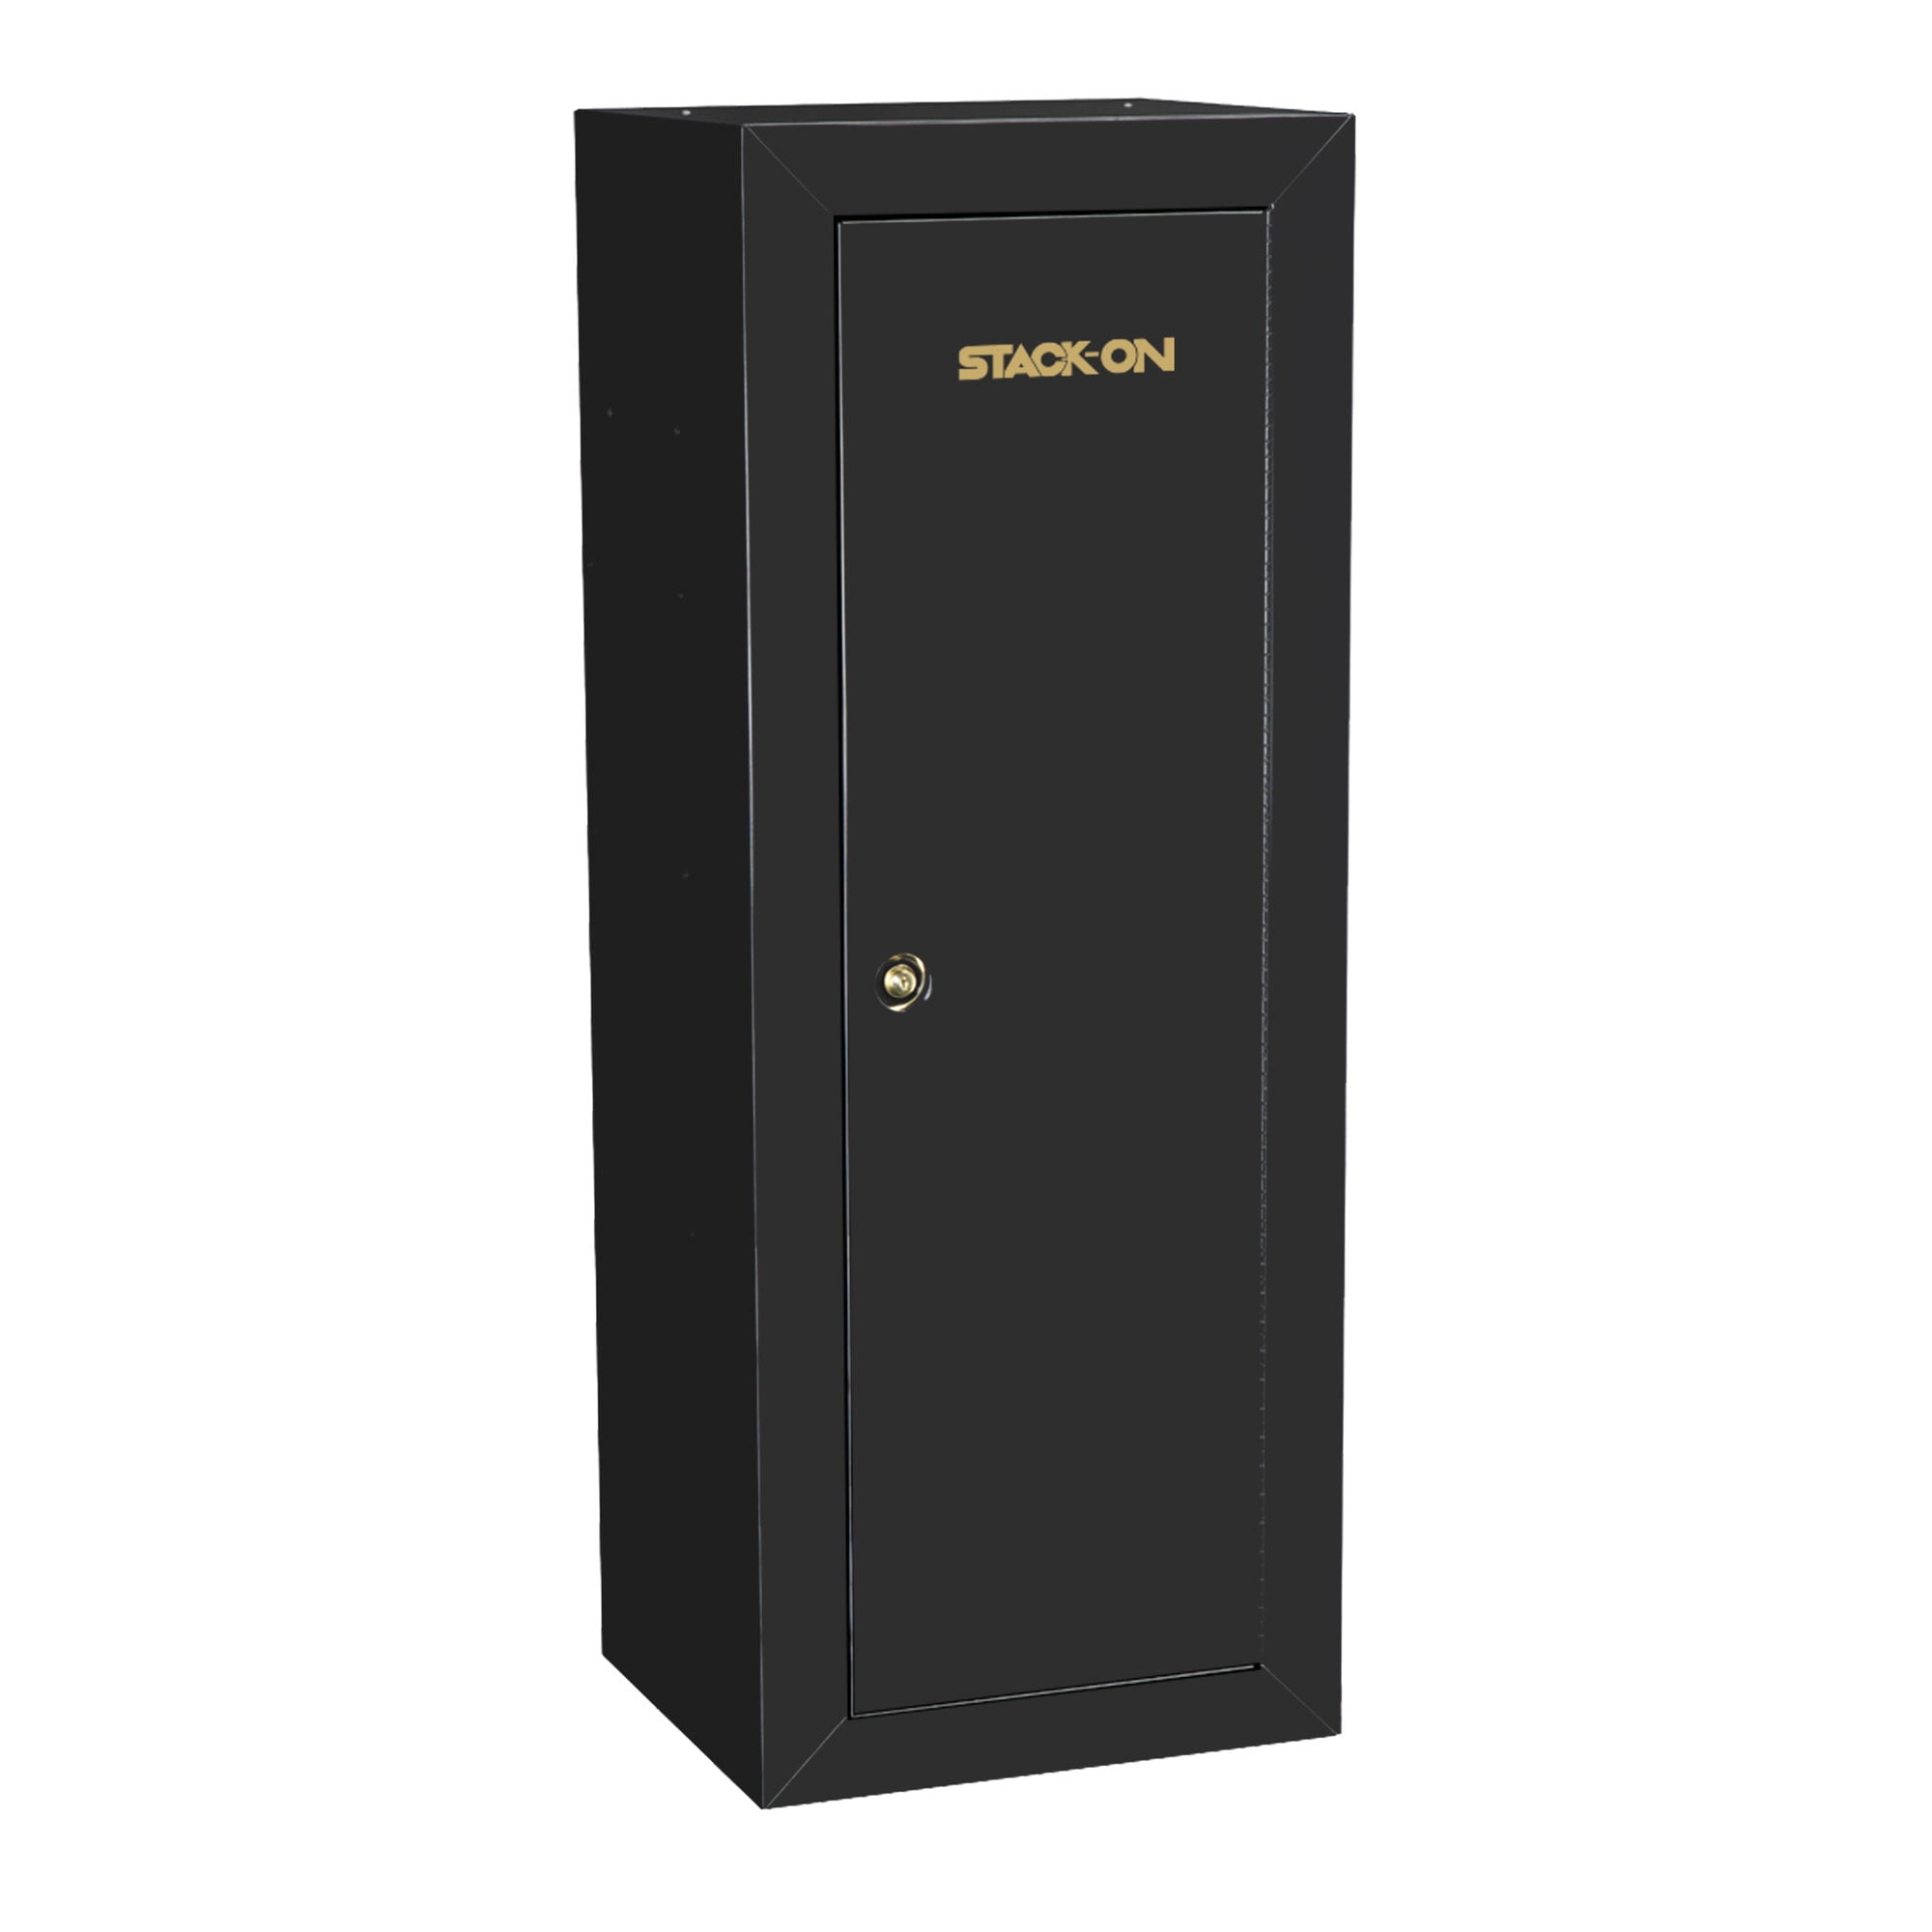 Sentinel 18 Gun Steel Security Cabinet by Stack-On 